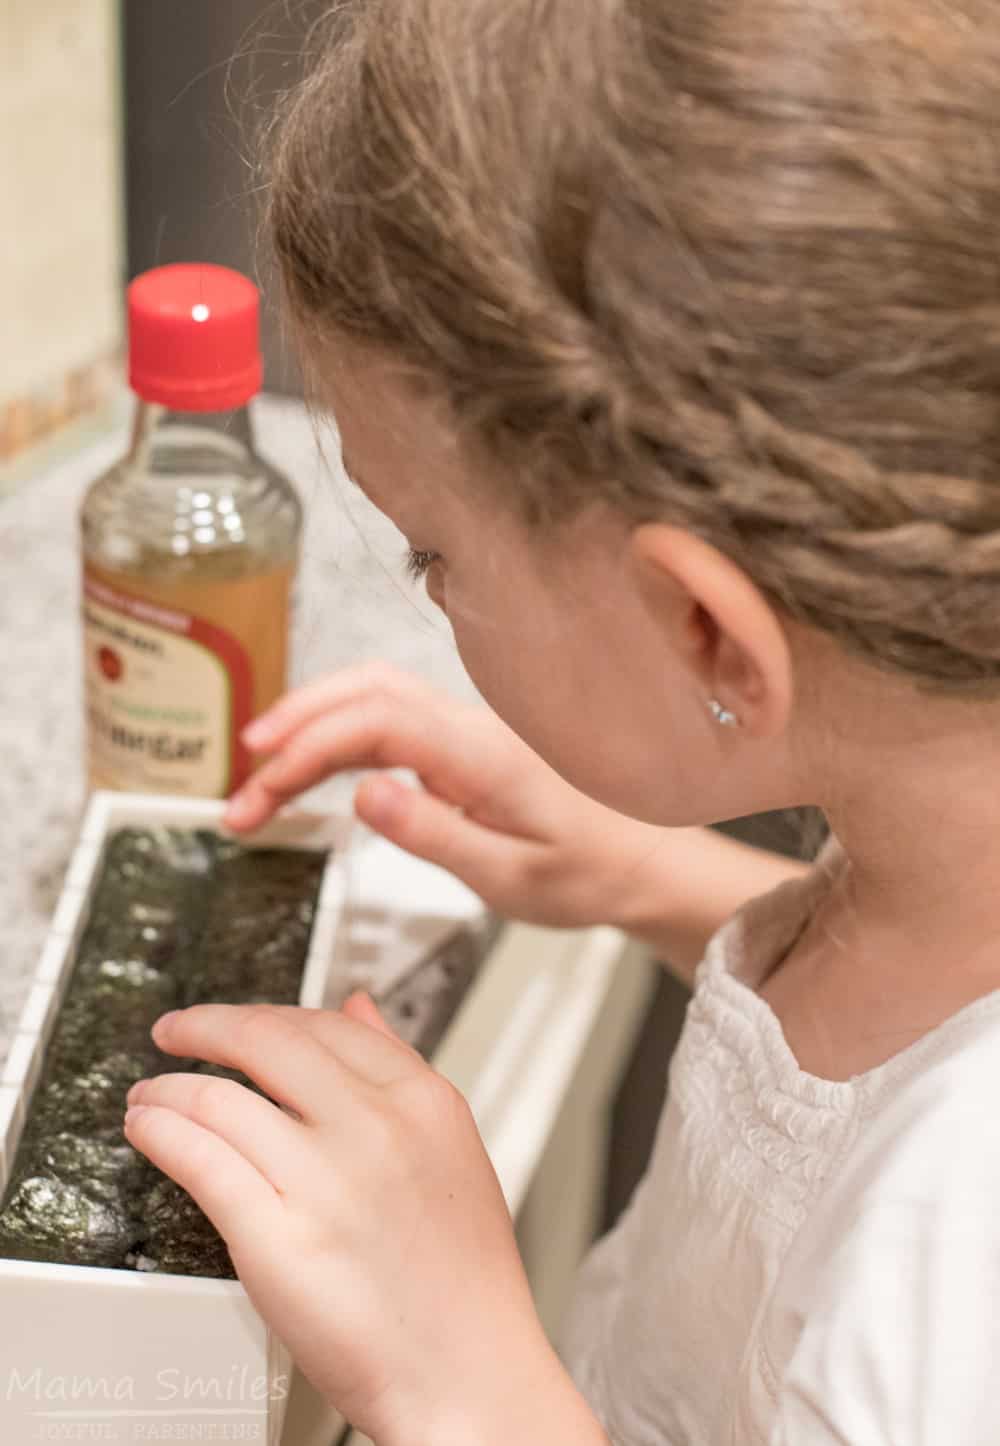 Great tips for making sushi easily at home with the kids.